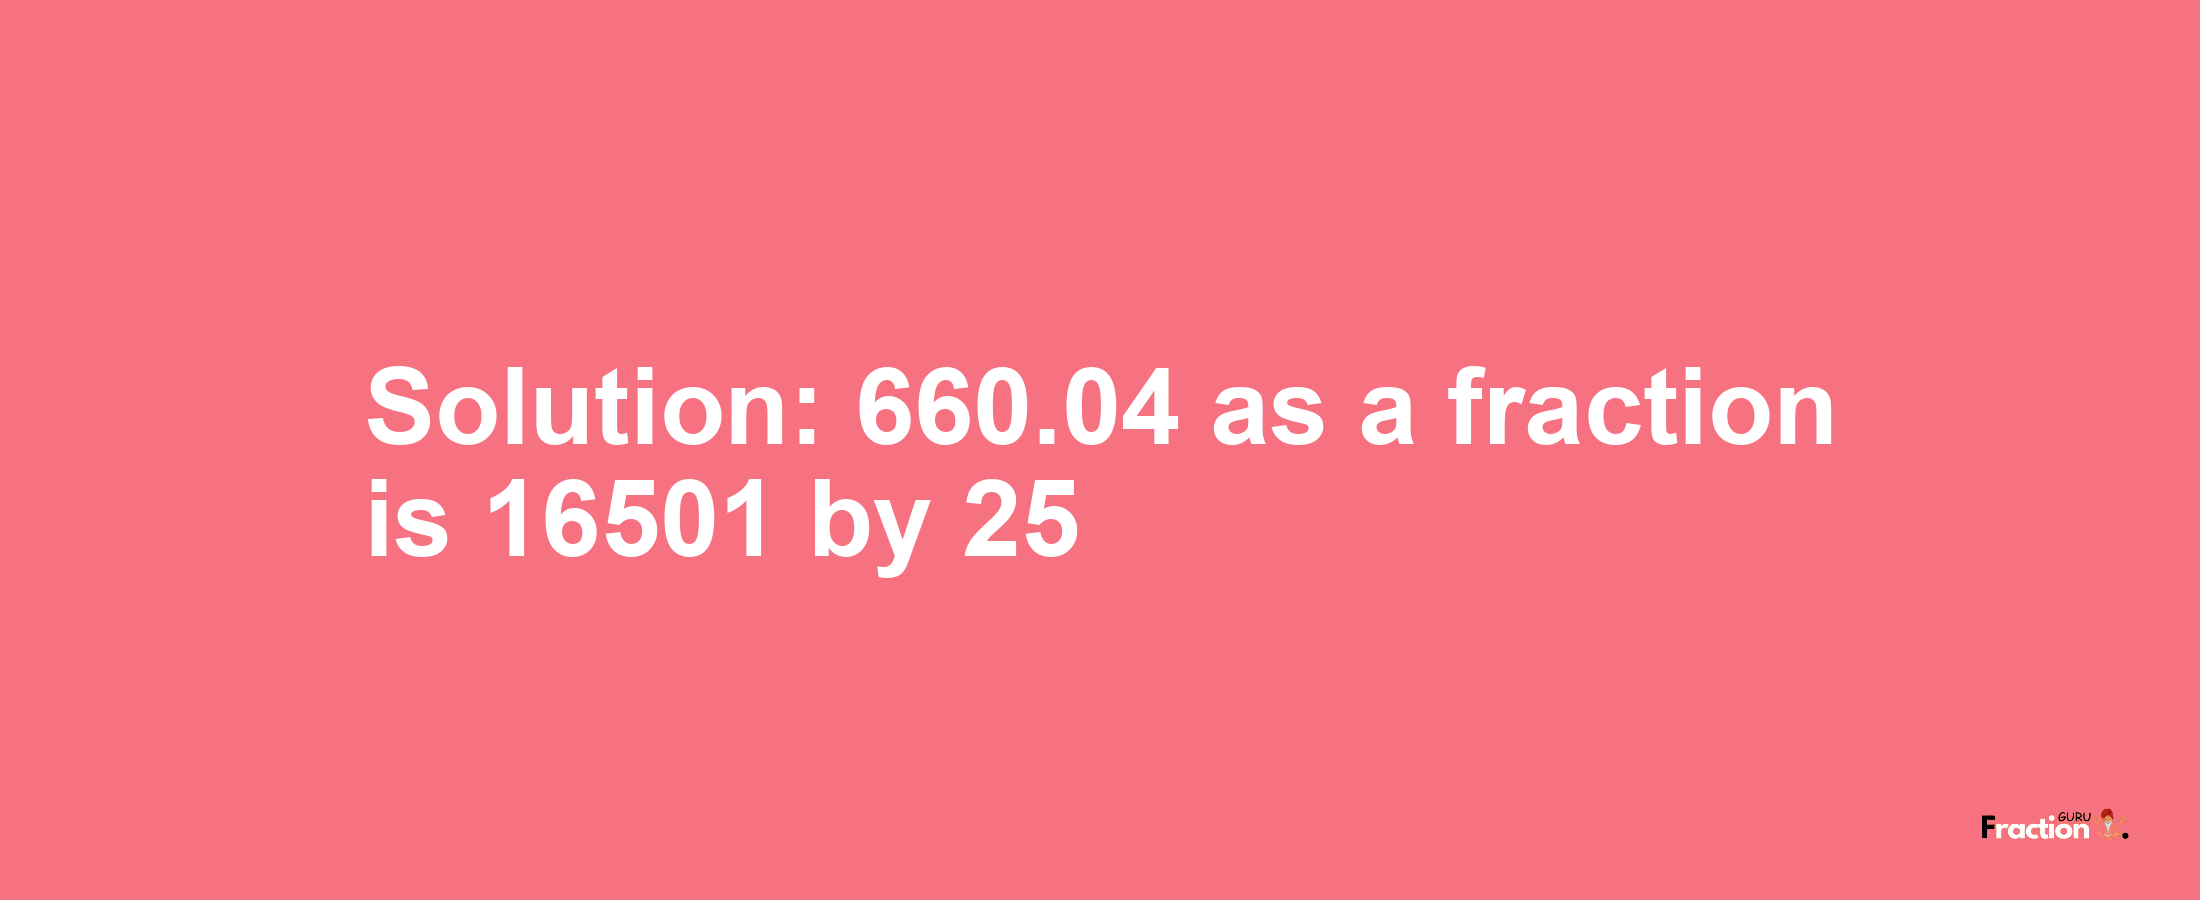 Solution:660.04 as a fraction is 16501/25